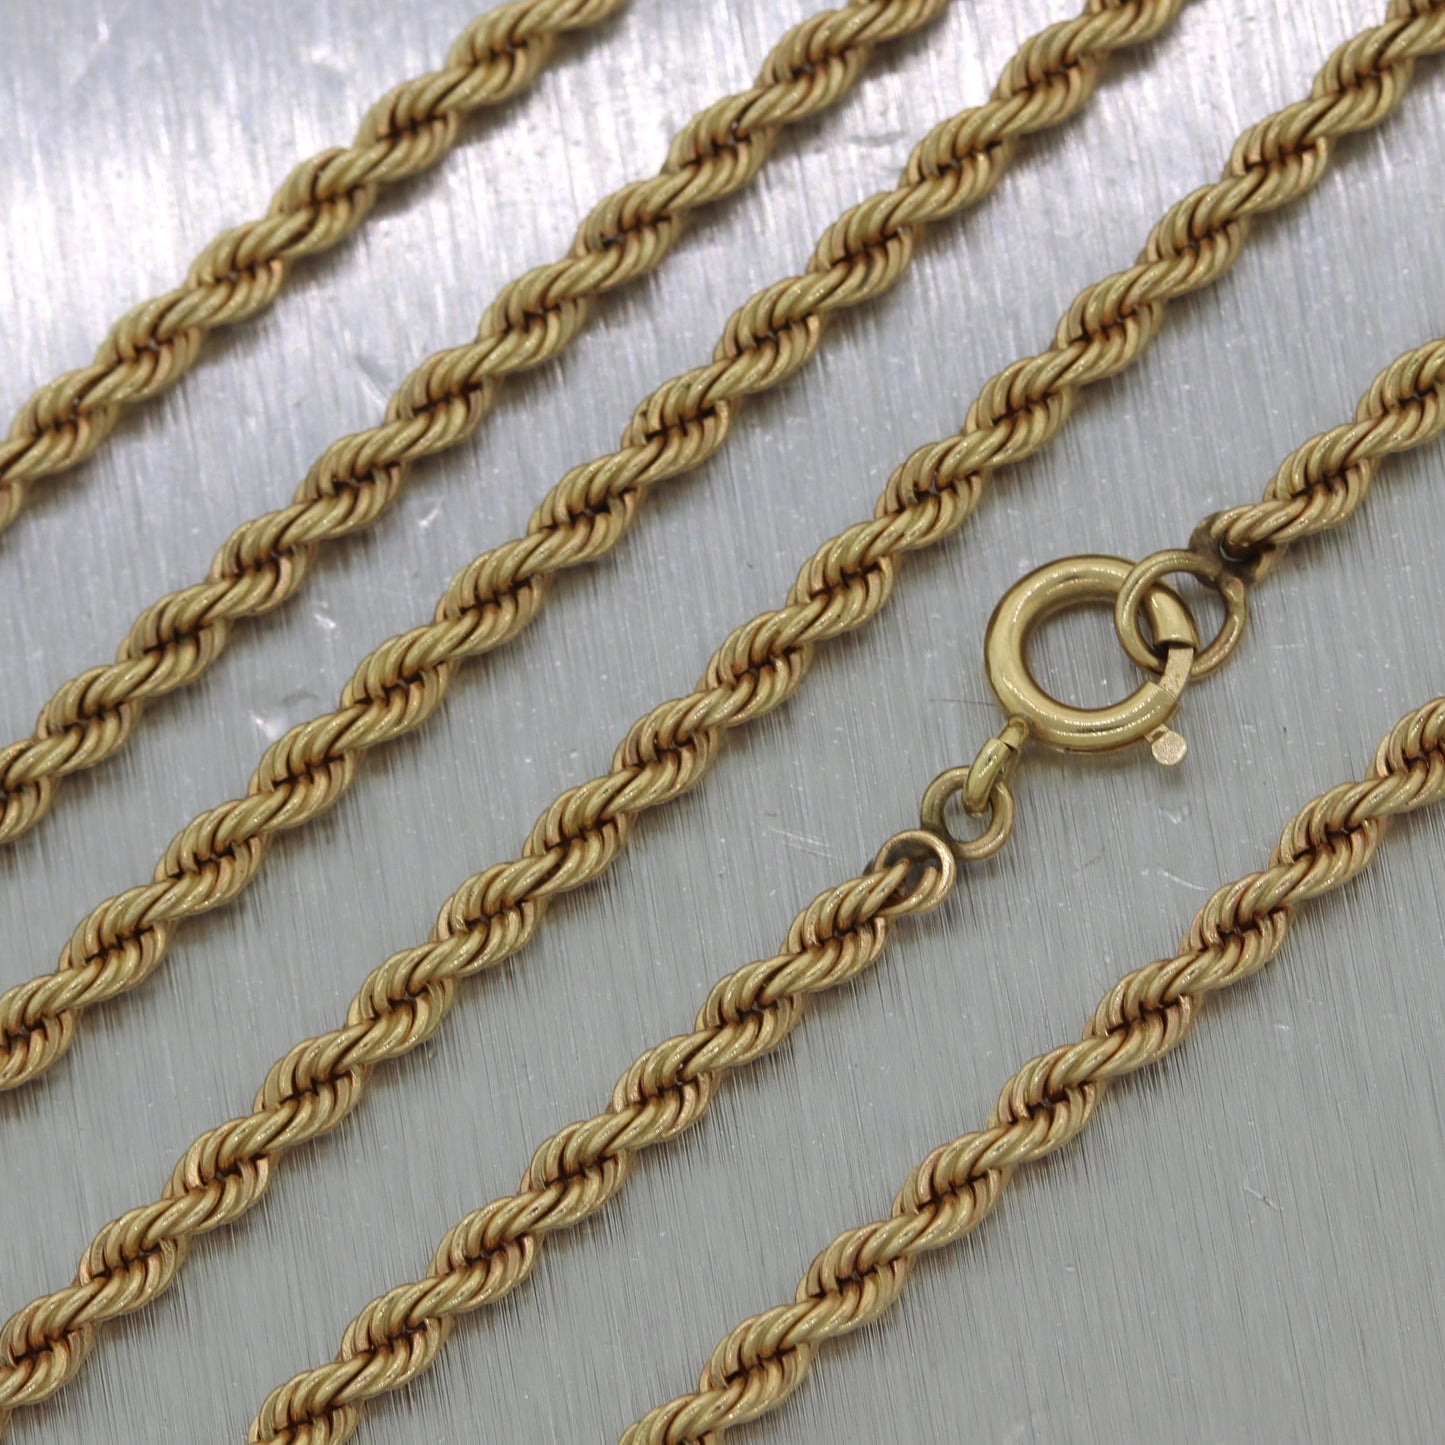 Men's 30.23g 14k Yellow Gold Solid Long Rope Chain 32" Necklace